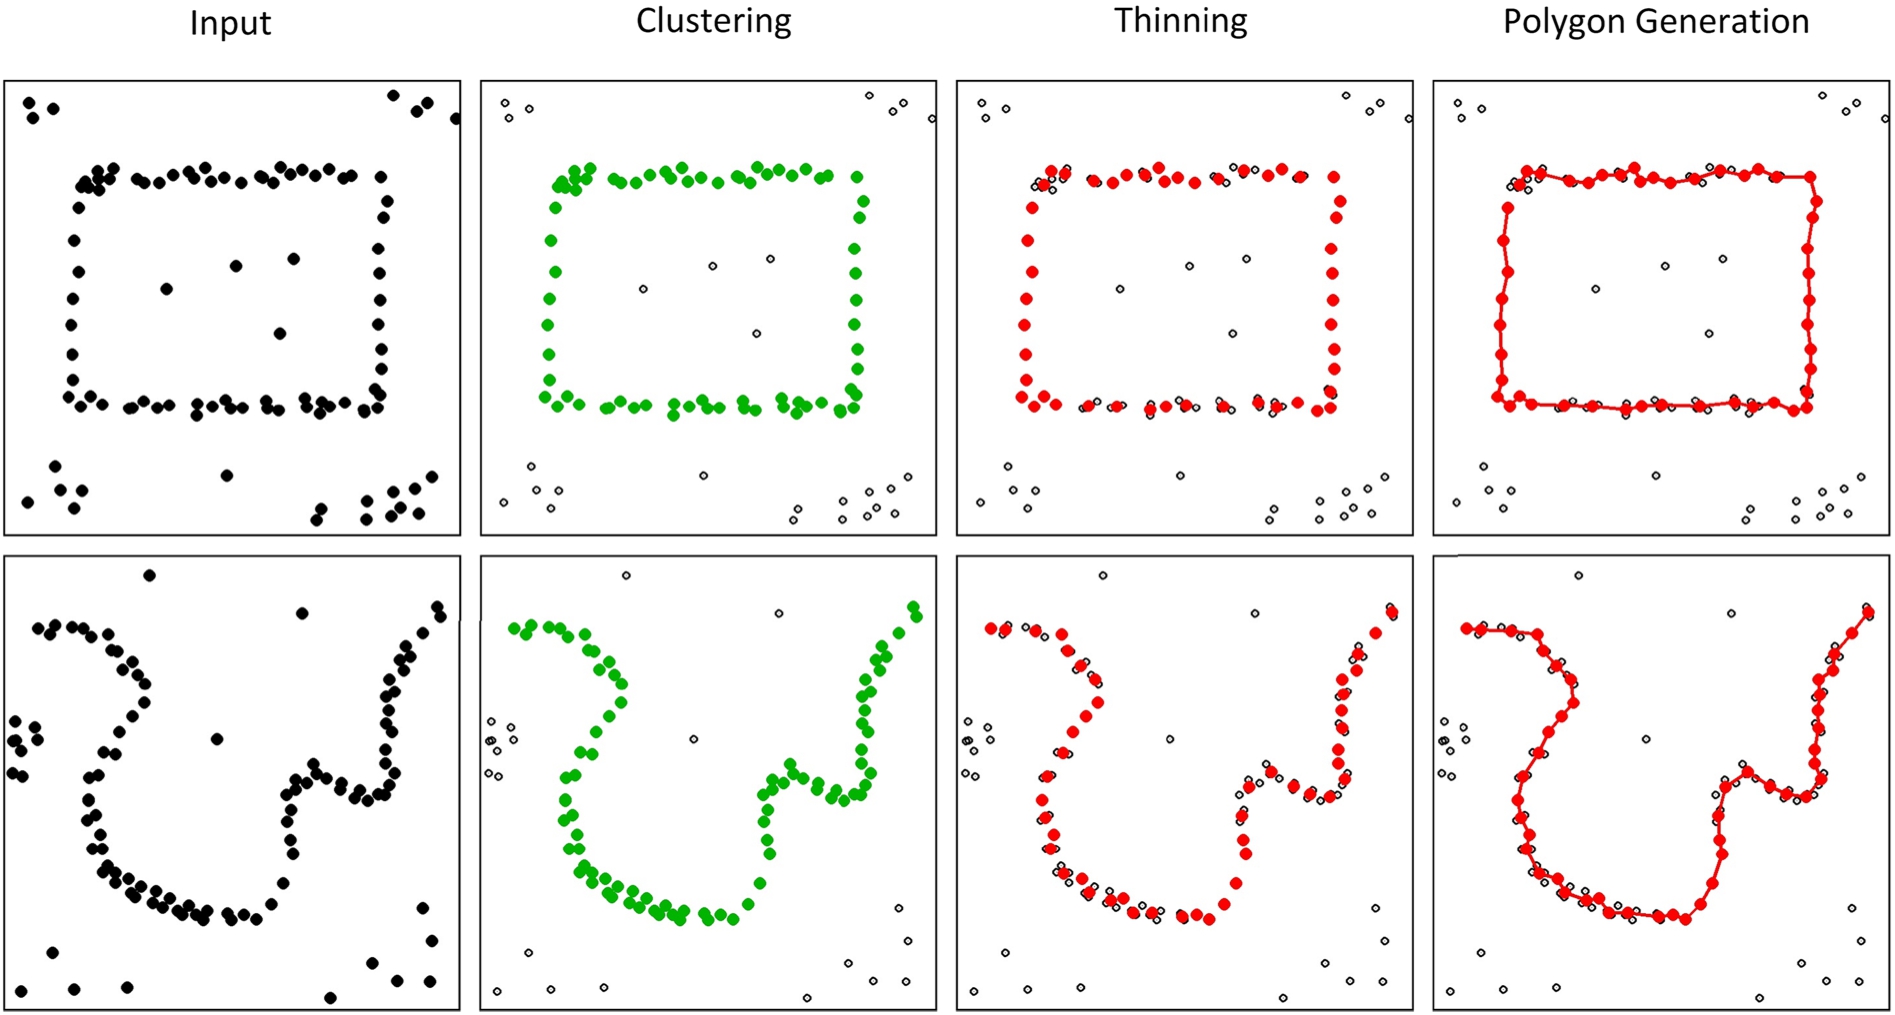 Processing stages extracting a polygonal chain from a point set including noise. Each row corresponds to a user-defined point set, a polygon in the first and a separating curve in the second row. The first column visualizes the input point set containing virtual border points but also noise and other clusters. The points assigned to the virtual border cluster are colored green in the second column. Thinning the virtual border cluster yields the red point set in column three. This is used to generate a polygonal chain as shown in the last column.